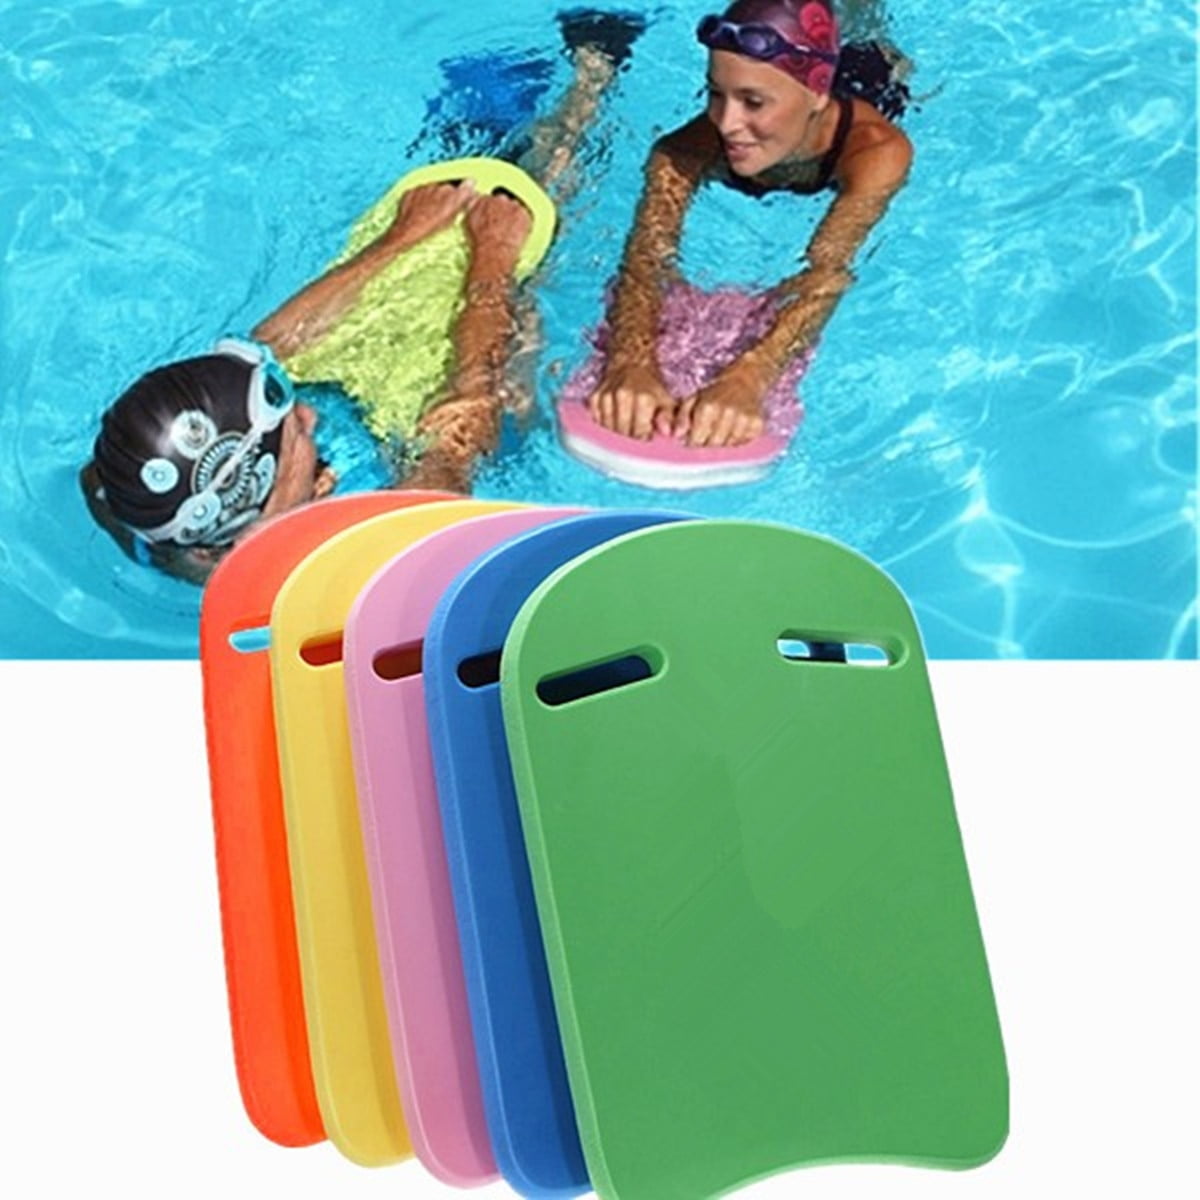 Voberry Swim Accessories for Swimming Lessons Training Aid Kickboards Swimming Adult and Kids,Lightweight Swim Board with Anti-Slip Smooth Edge and Integrated Hole Handle